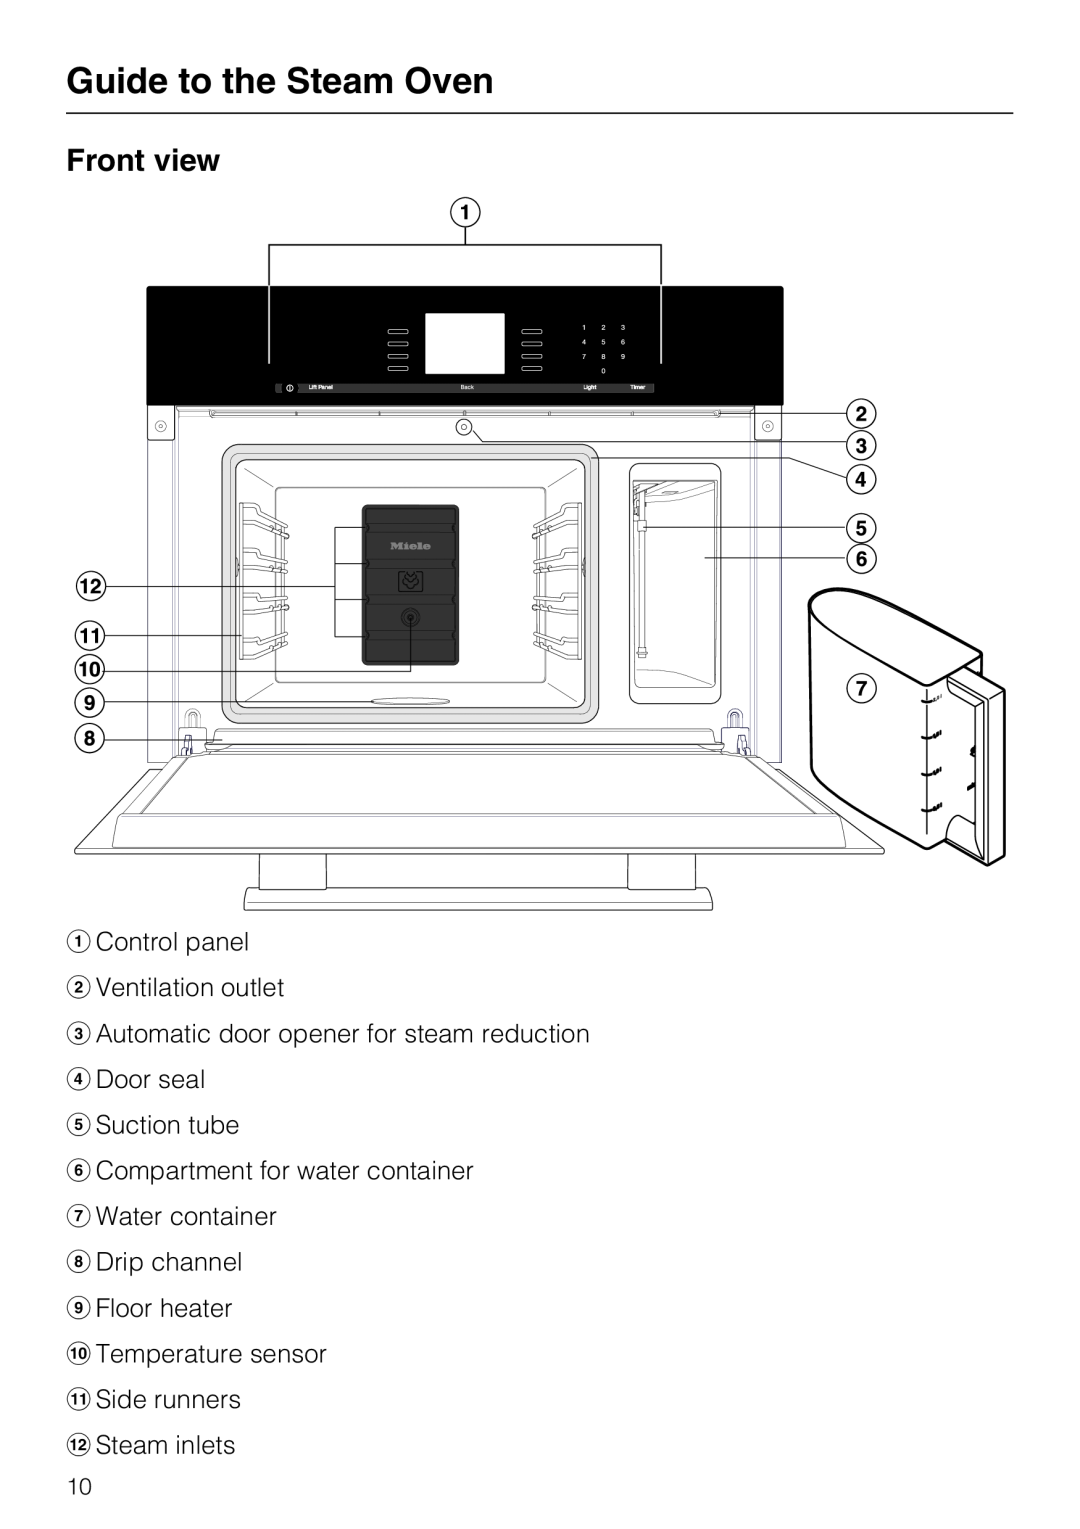 Miele 09 800 830 installation instructions Guide to the Steam Oven, Front view 